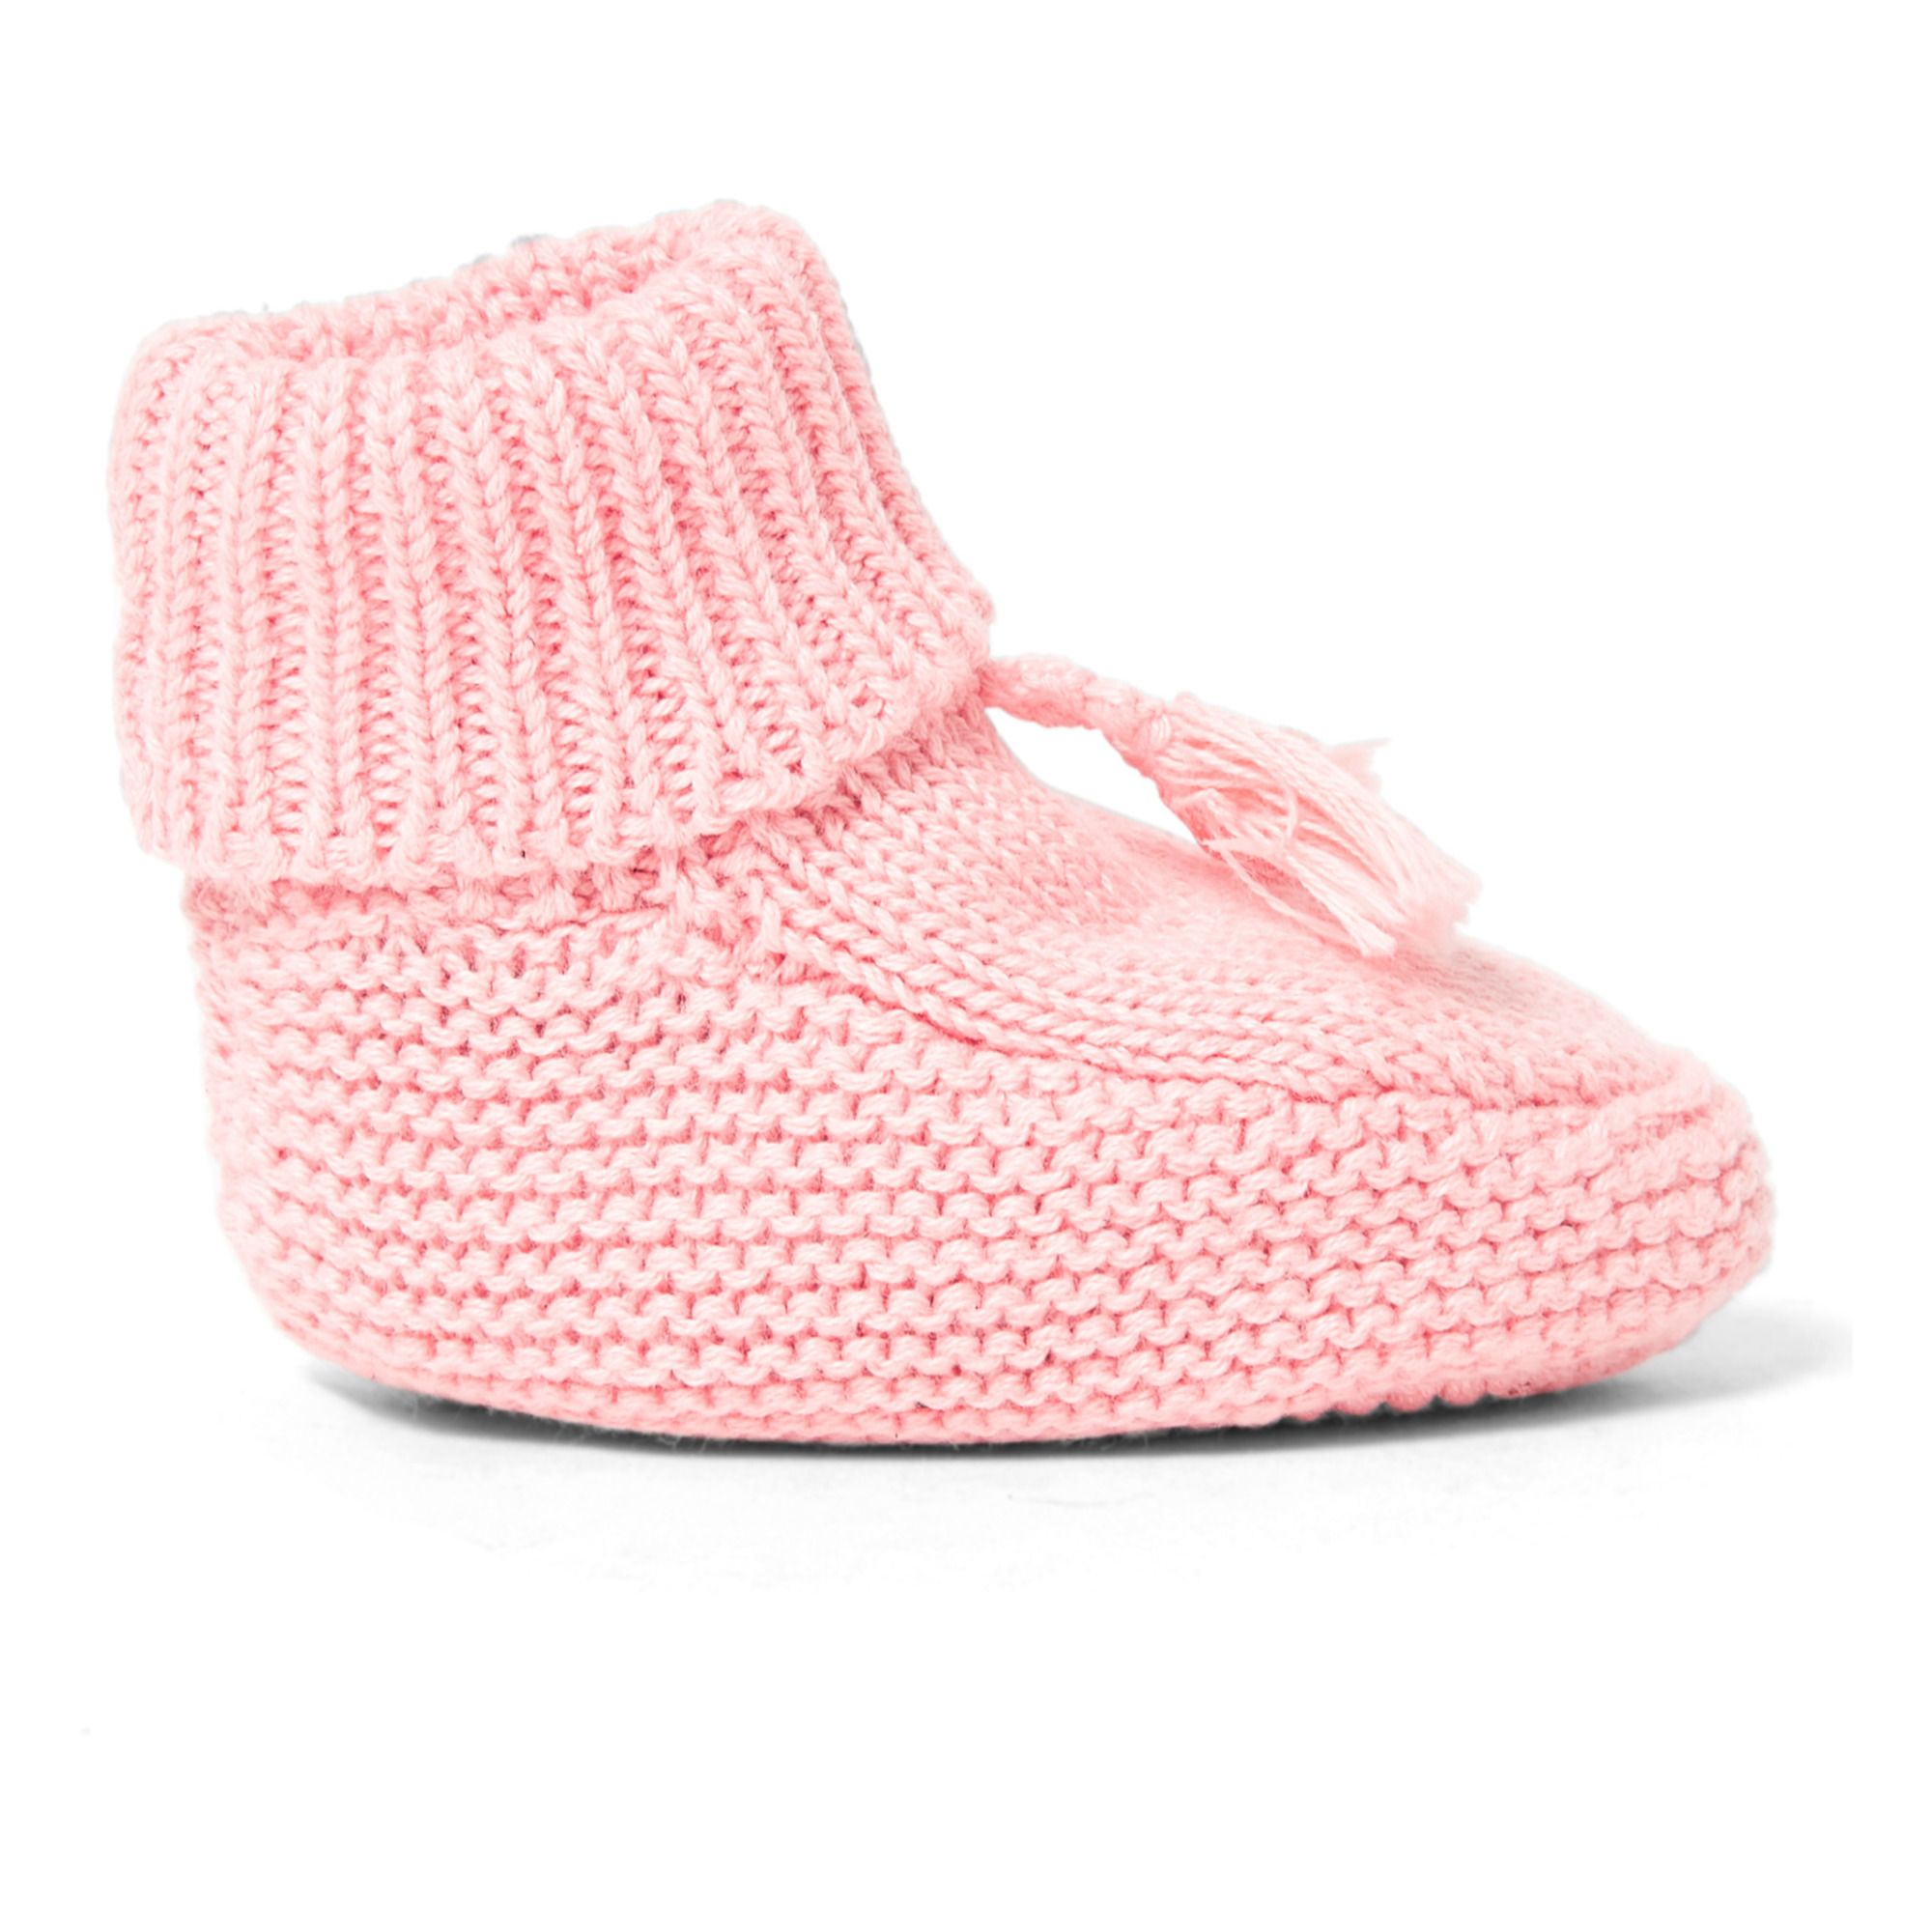 Tartine et Chocolat - Chaussons Tricot - Fille - Rose